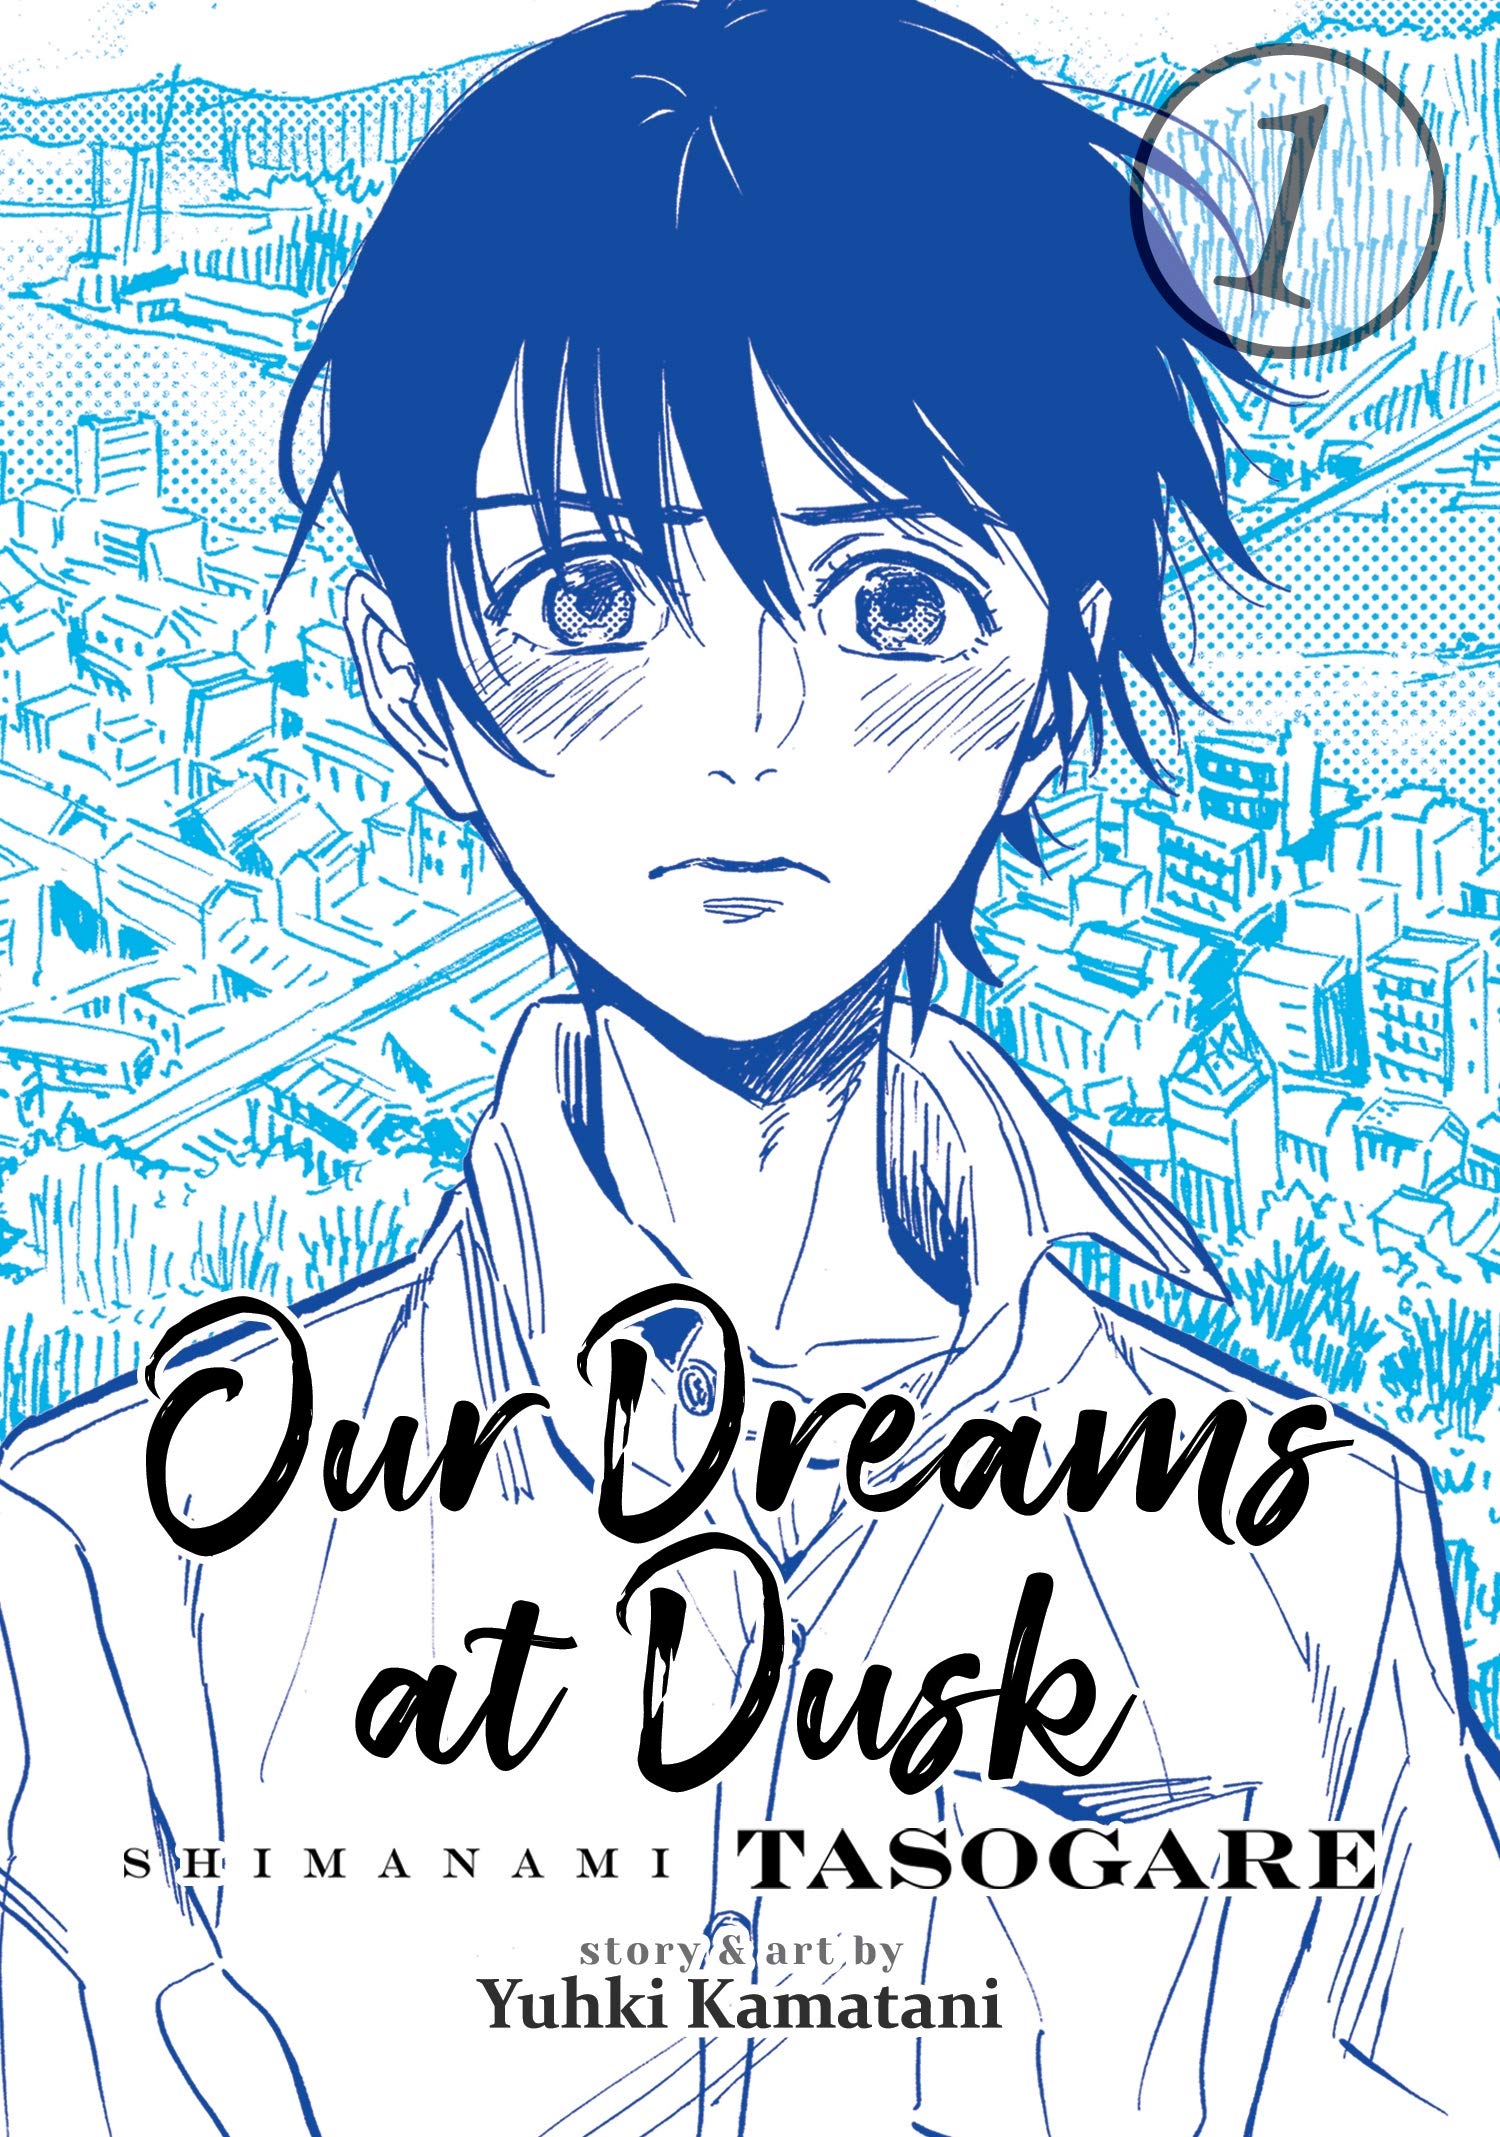 Best Comics of 2019: Our Dreams At Dusk